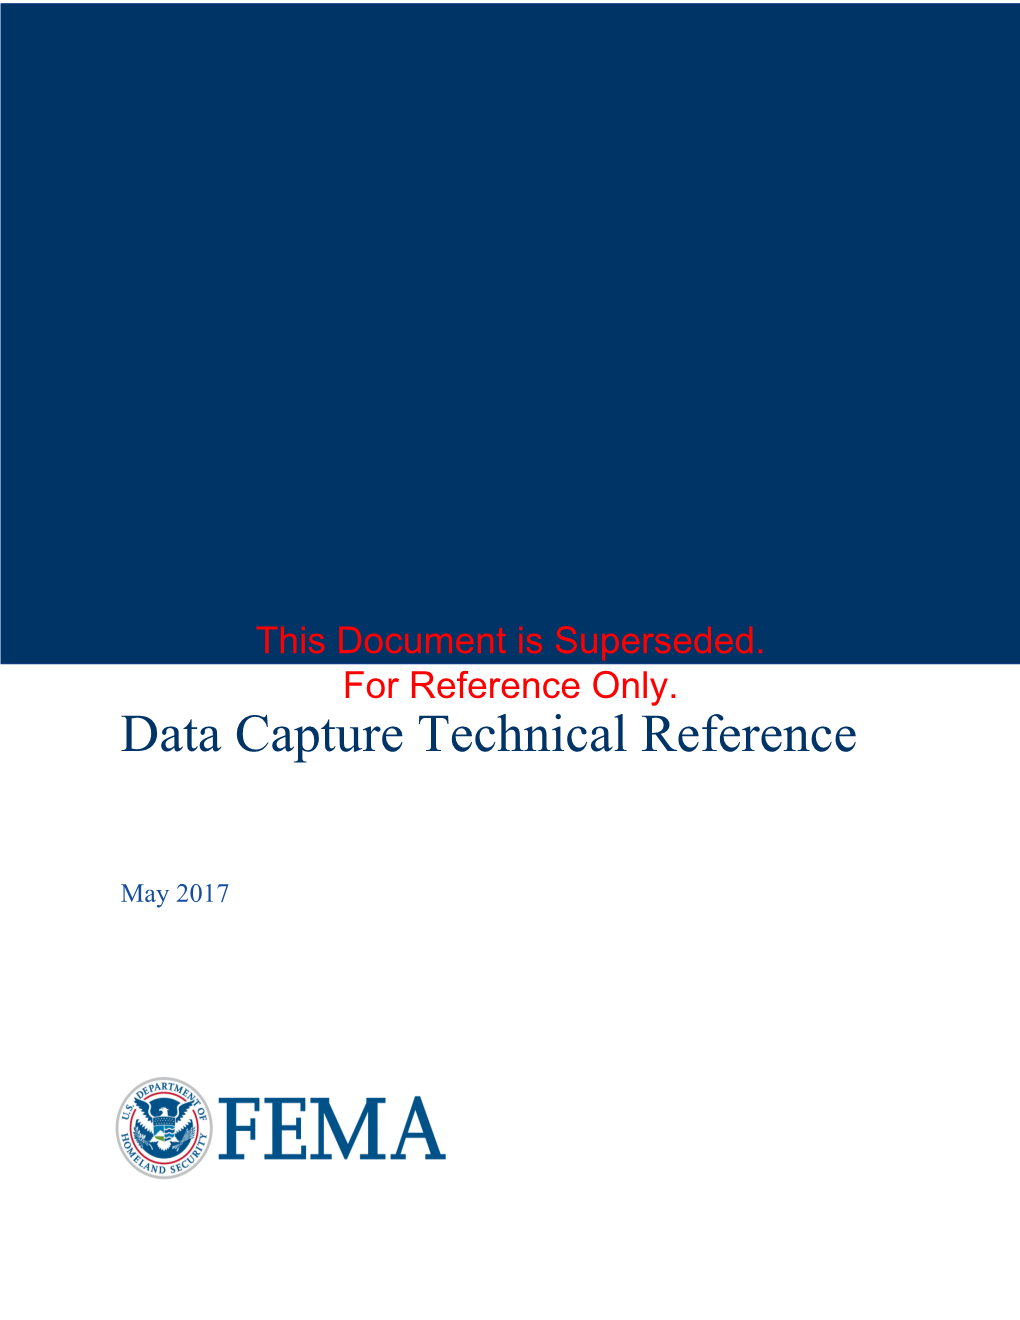 Data Capture Technical Reference